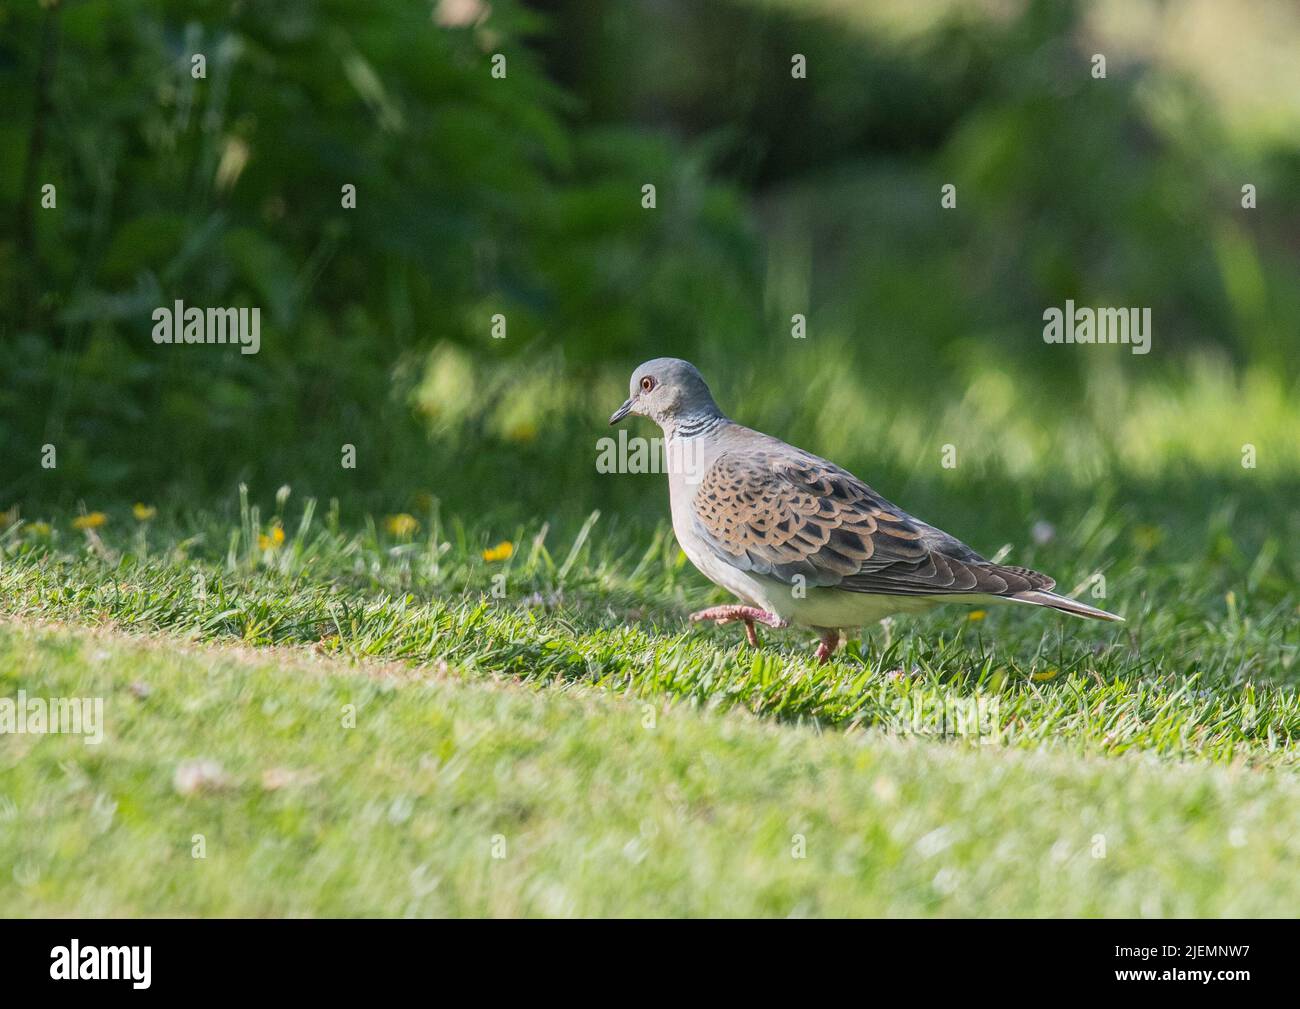 A bird on the brink of extinction. A beautiful Turtle Dove walking across the grass in an Essex garden , UK Stock Photo